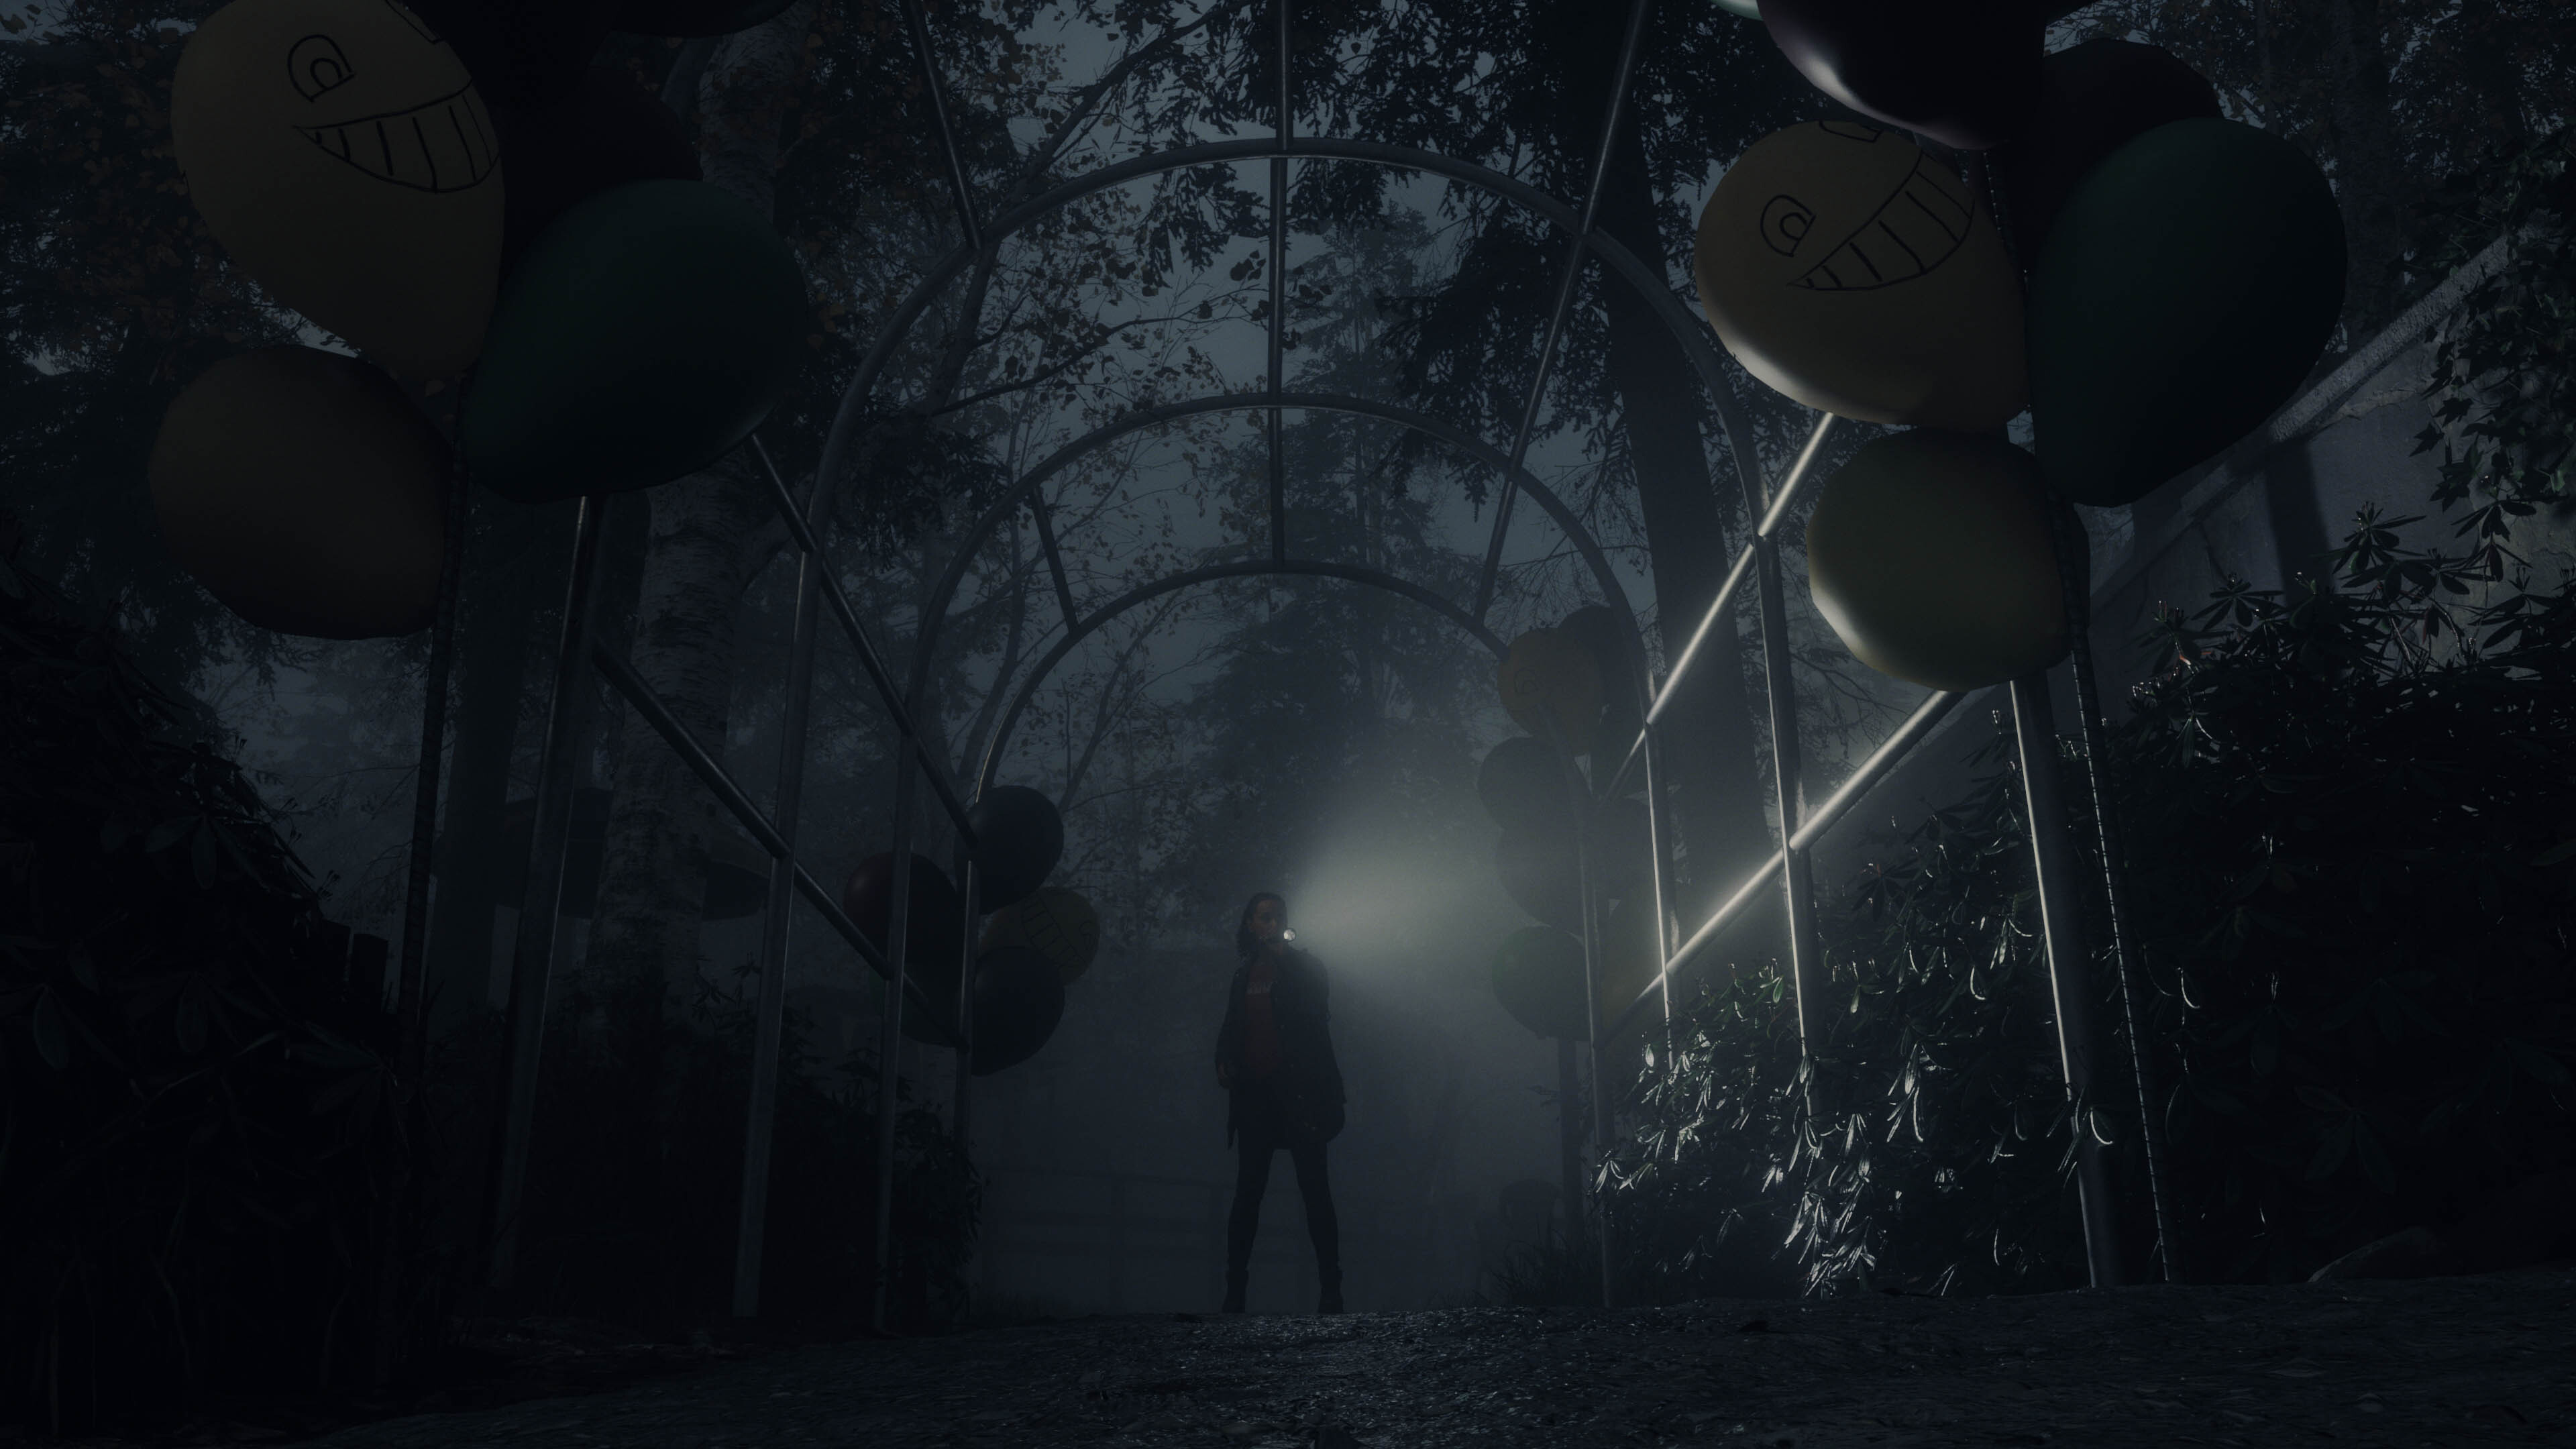 Alan Wake 2 Behind-the-Scenes Video Discusses its Survival Horror Gameplay  and Systems